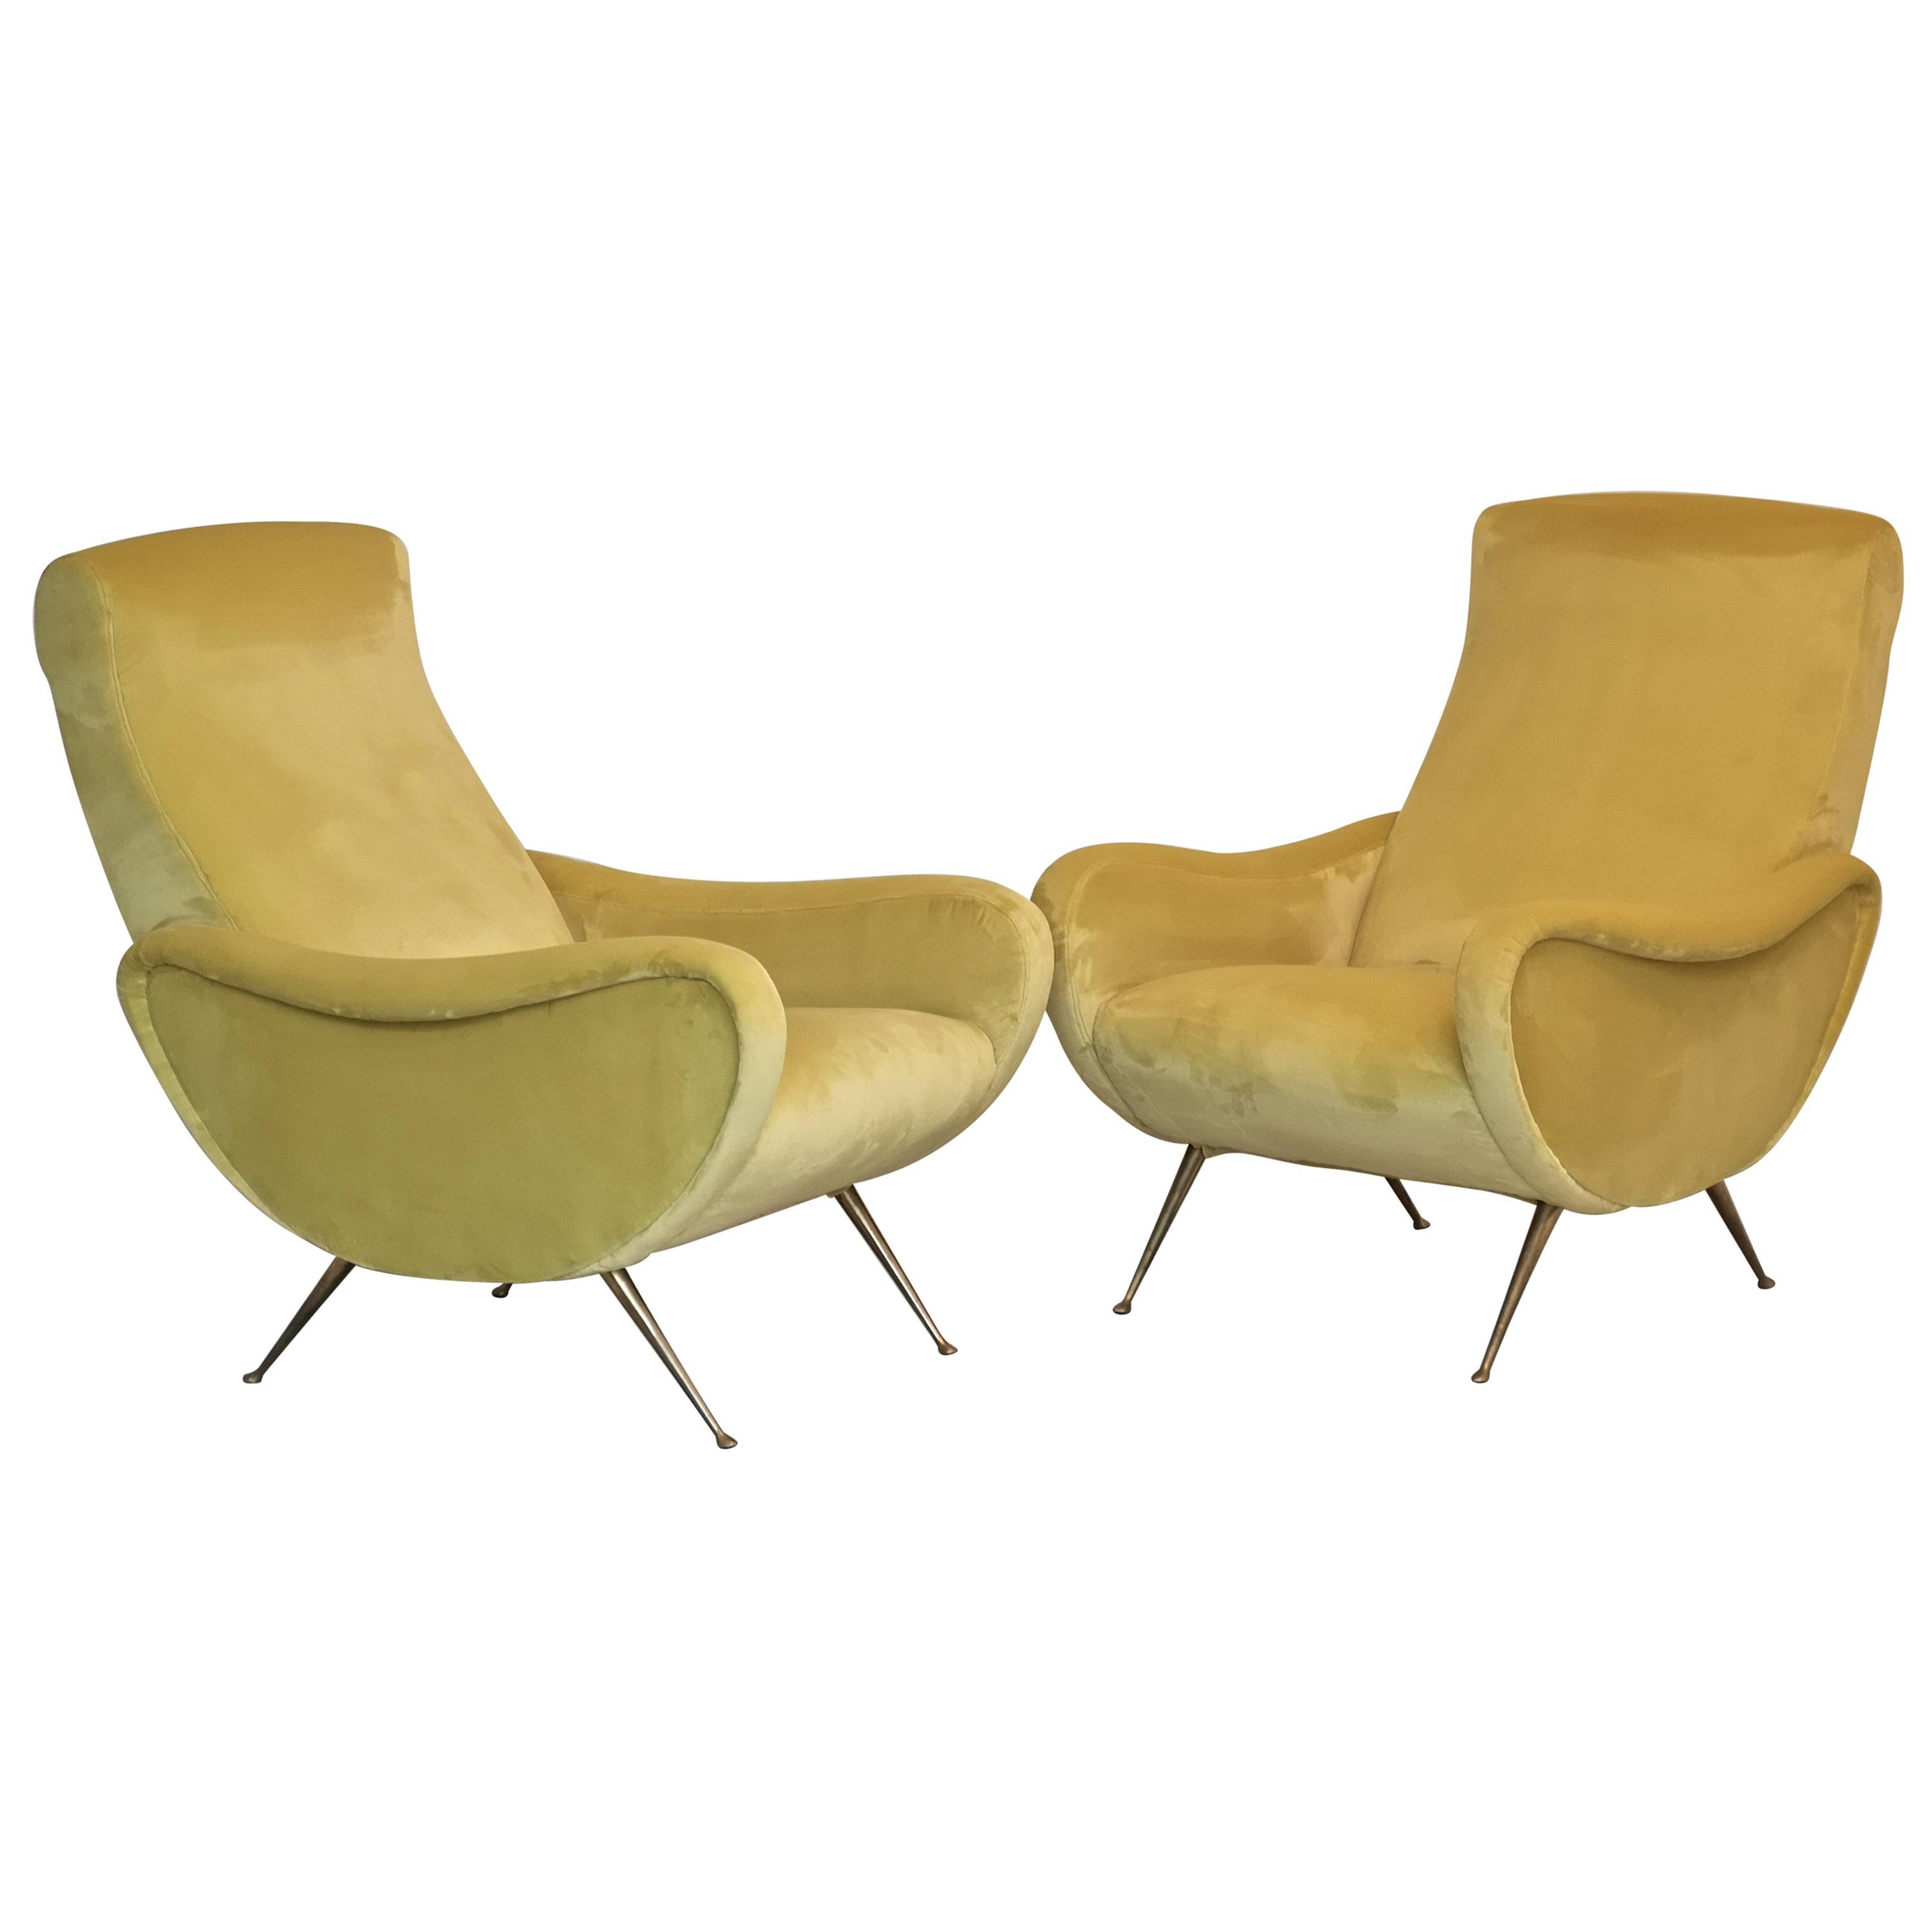 Two Armchairs Marco Zanuso Style, Fully Restored High Pile Canary Cotton Velvet